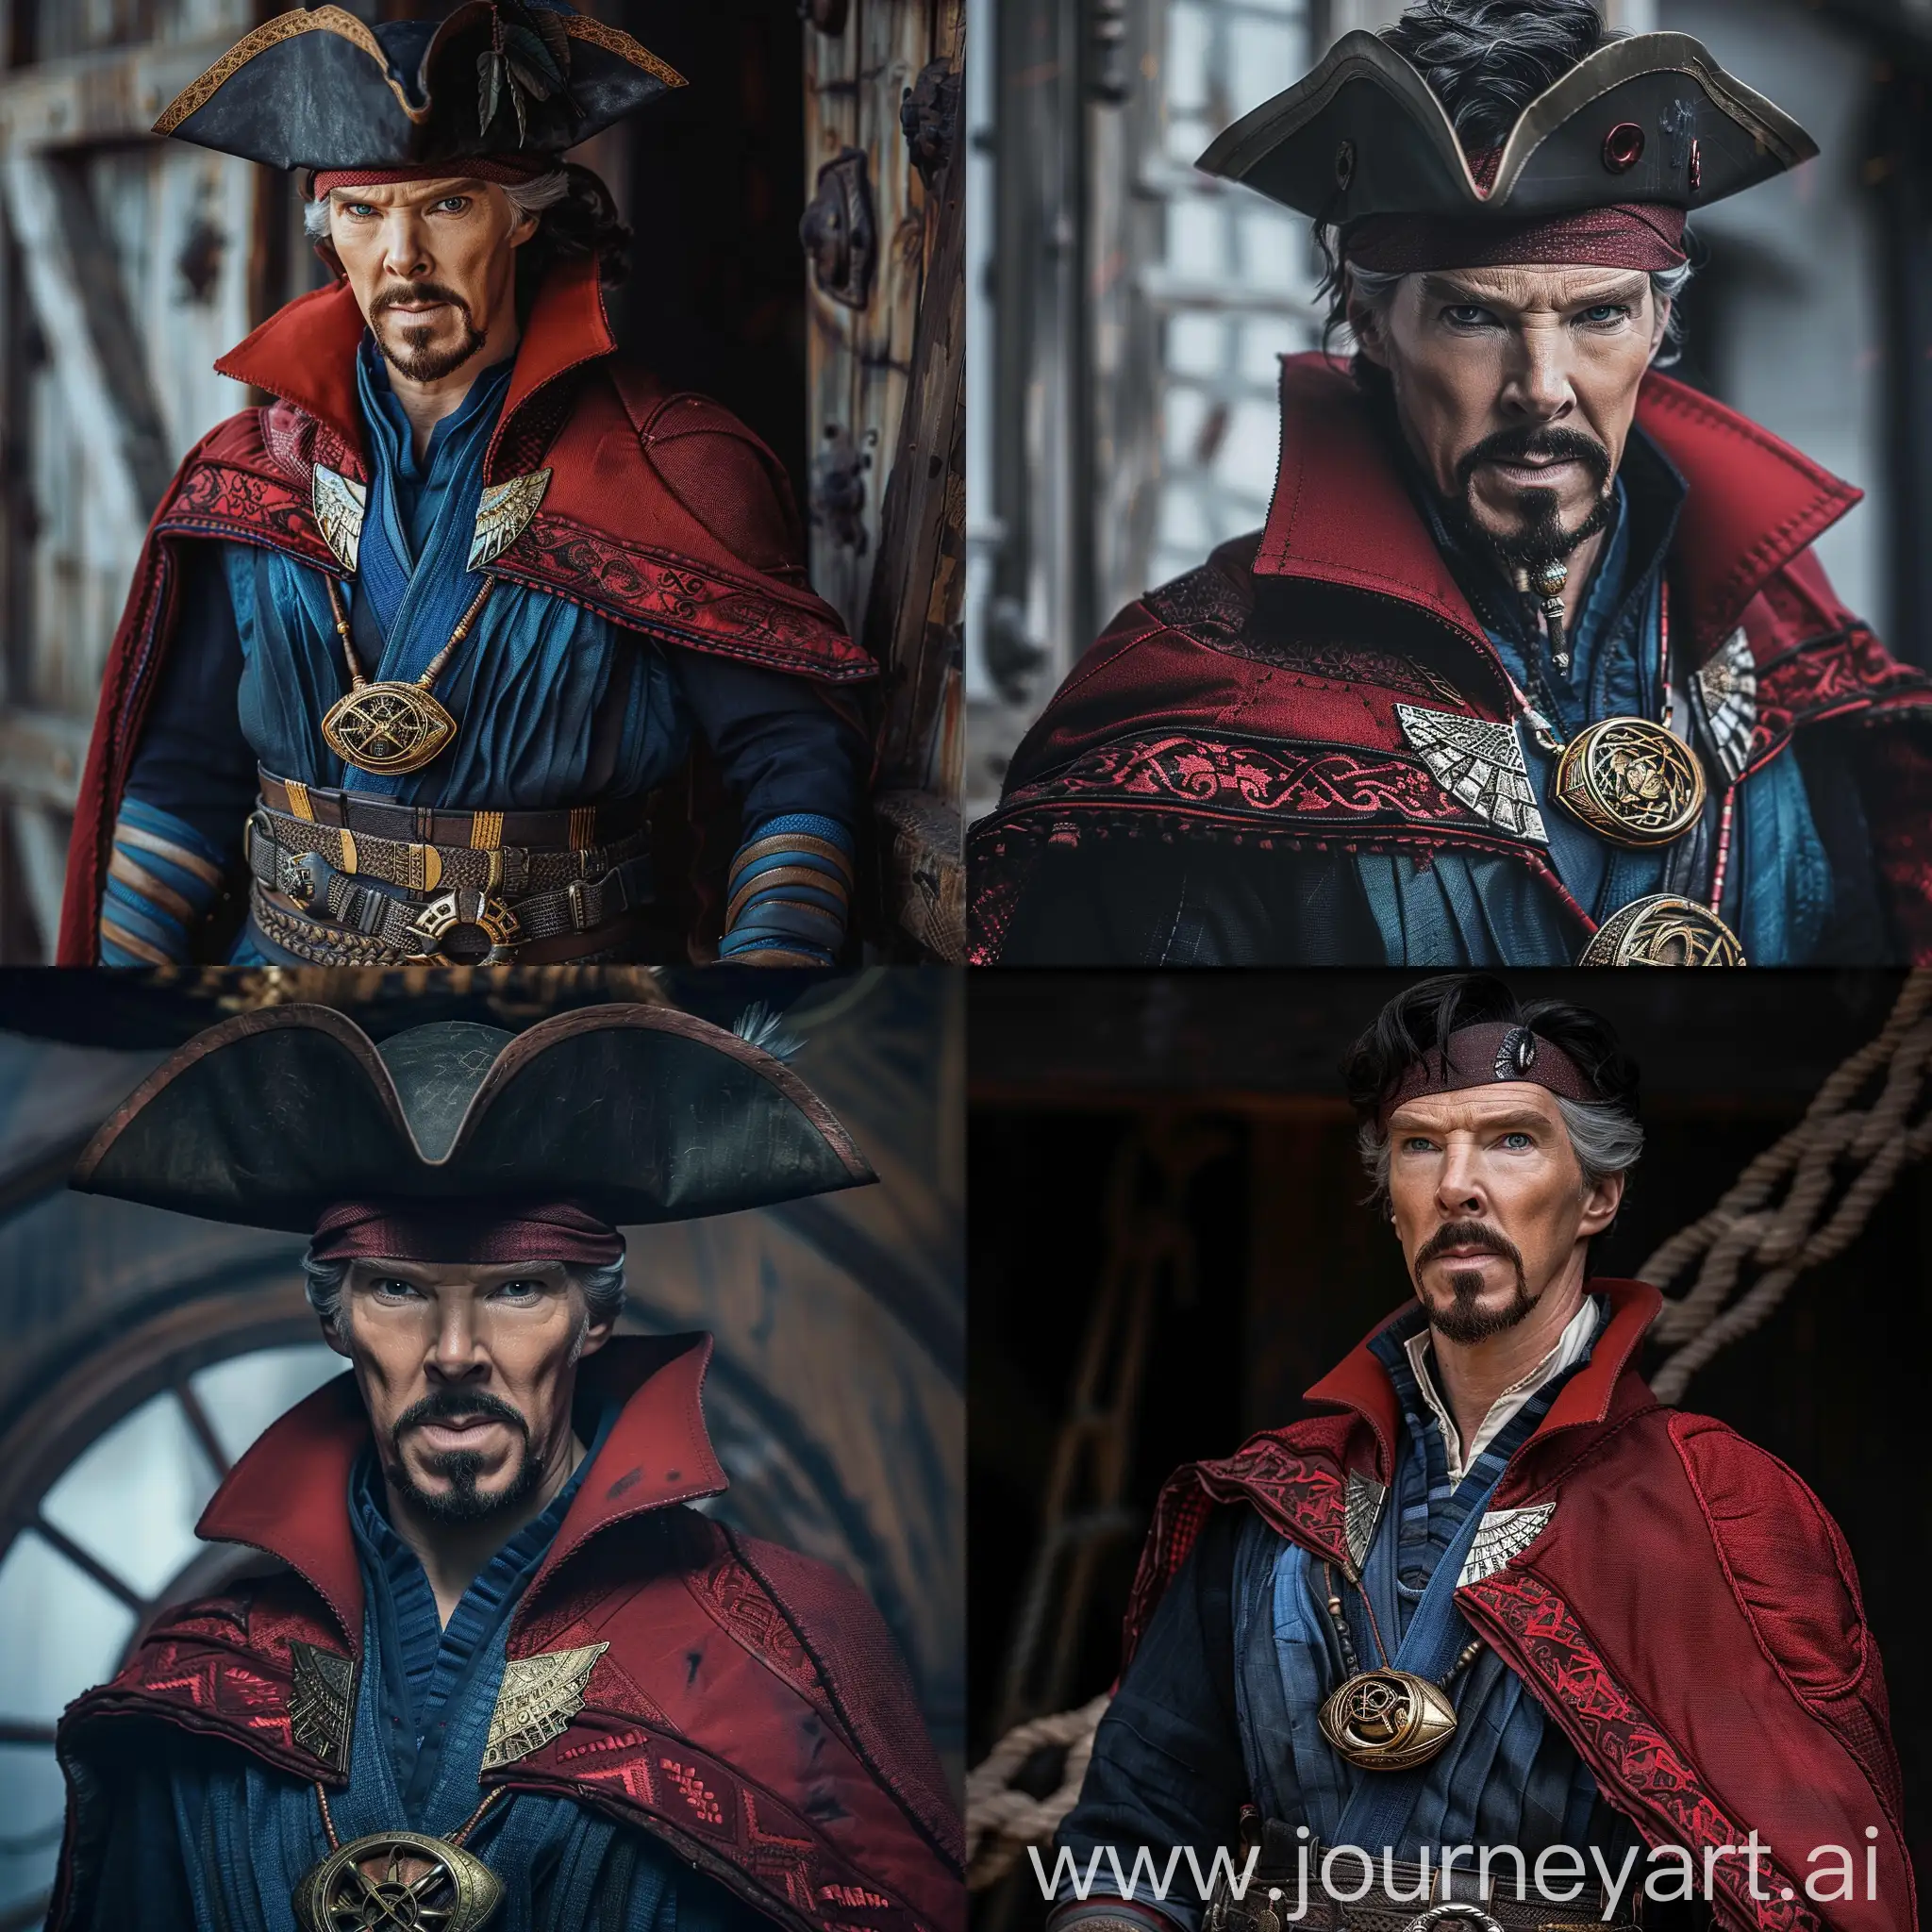 Doctor Strange, dressed as a pirate